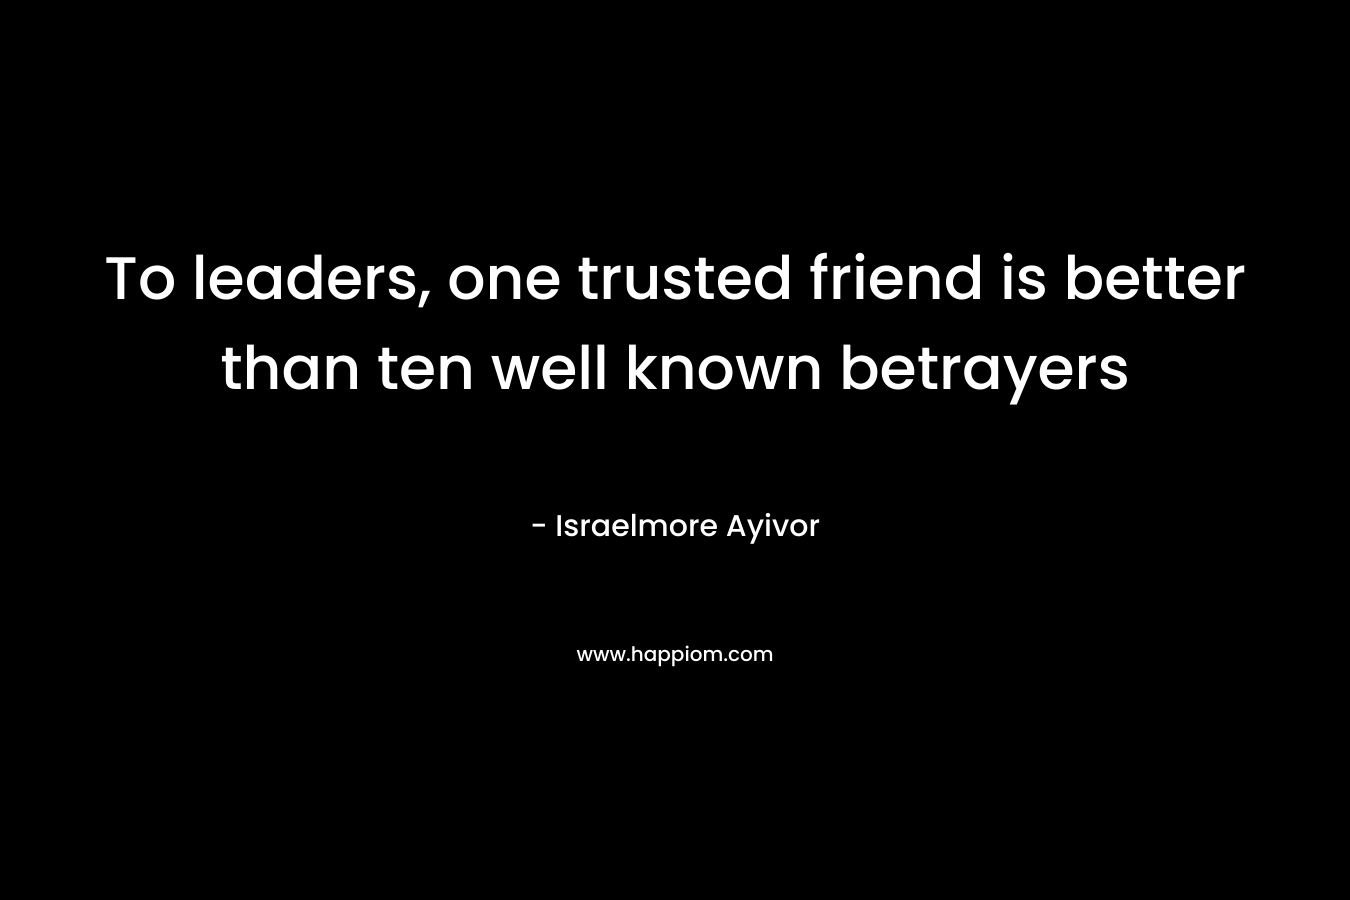 To leaders, one trusted friend is better than ten well known betrayers – Israelmore Ayivor